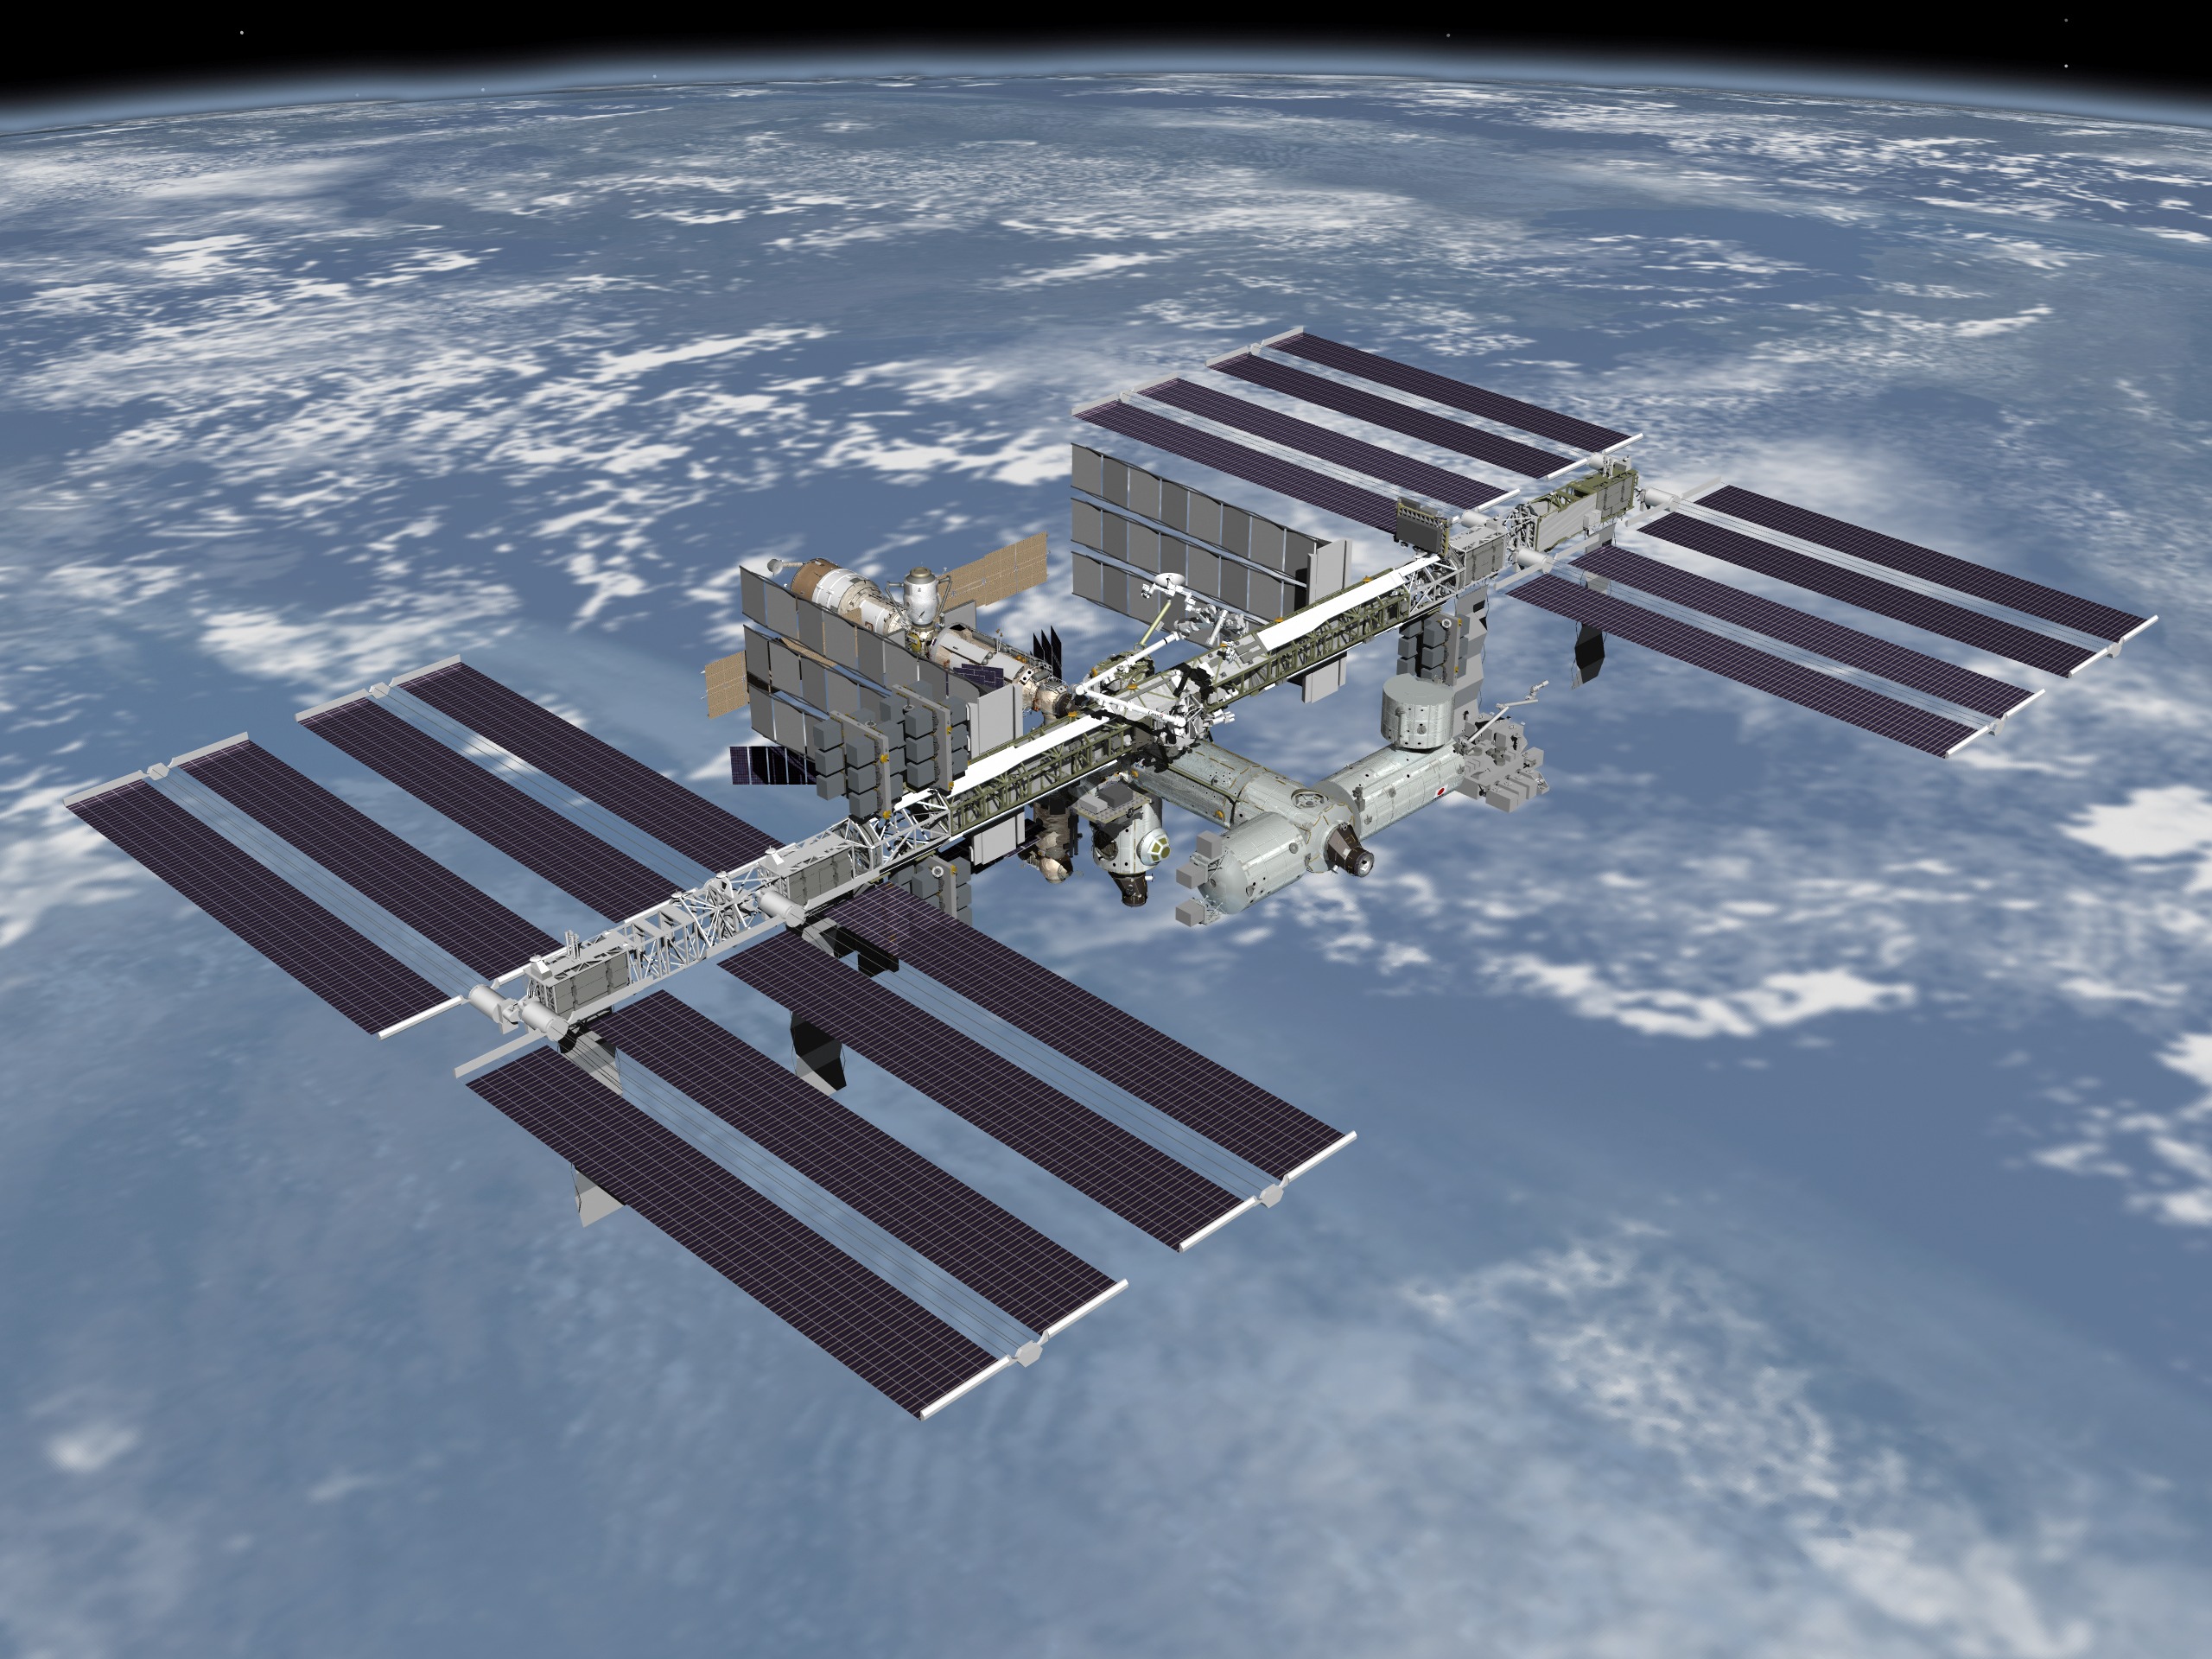 The International Space Station Iss Is A Habitable Artificial